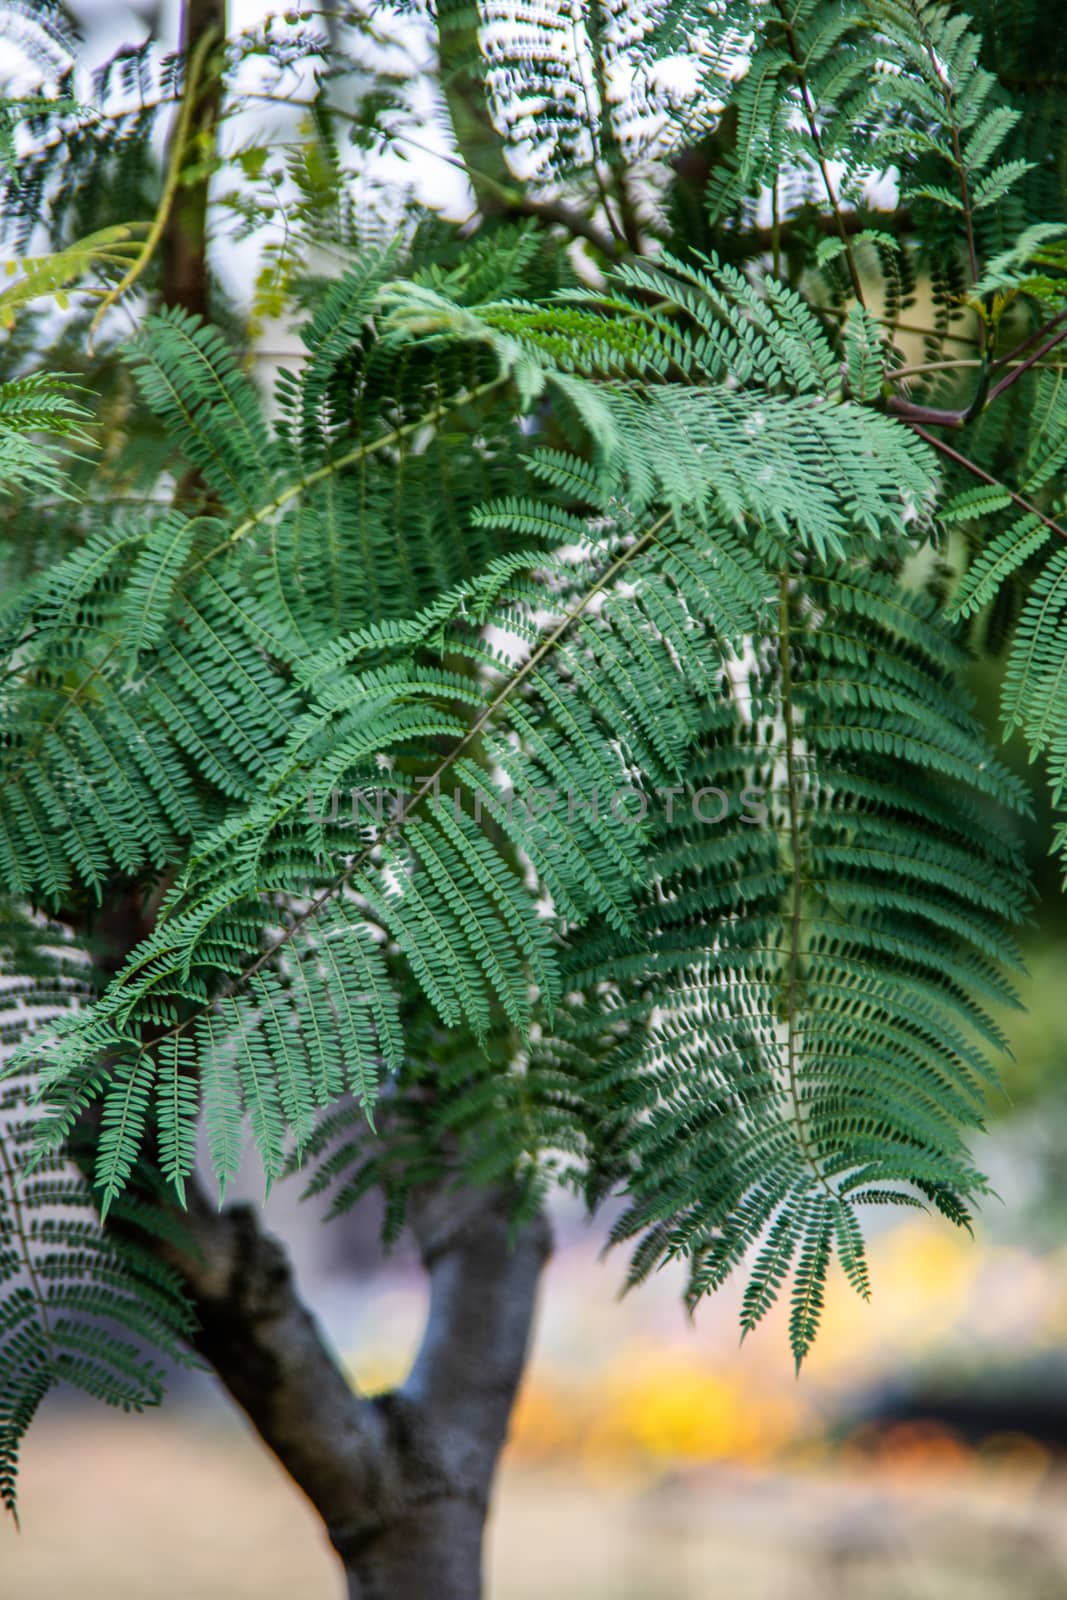 Mountain ash tree with pinnate leaves in the garden by Dr-Lange